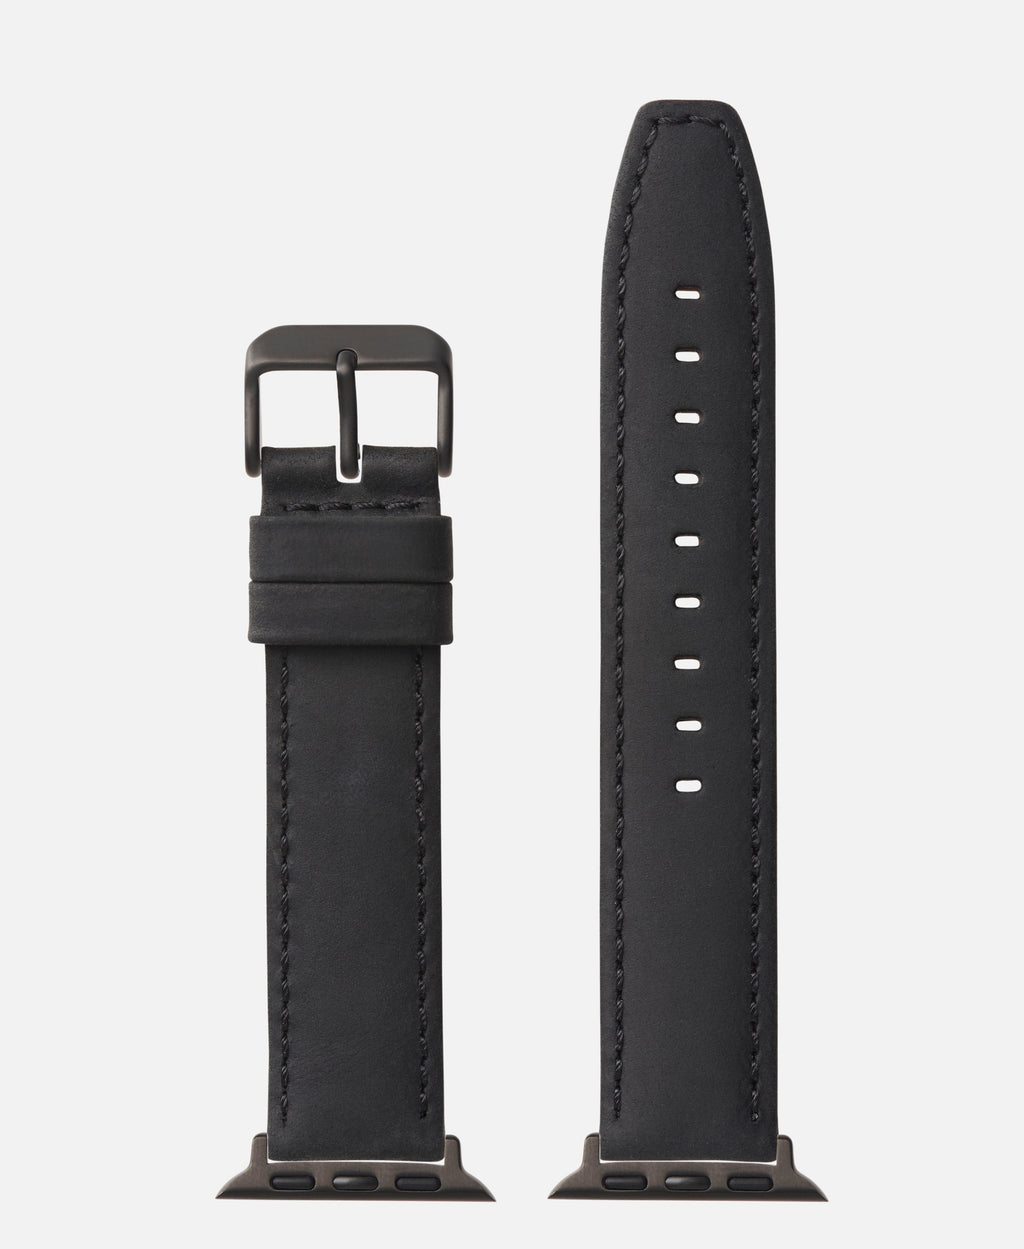  Apple Watch Compatible Black Color Distressed Crazy Horse Watch Band 38mm/40mm